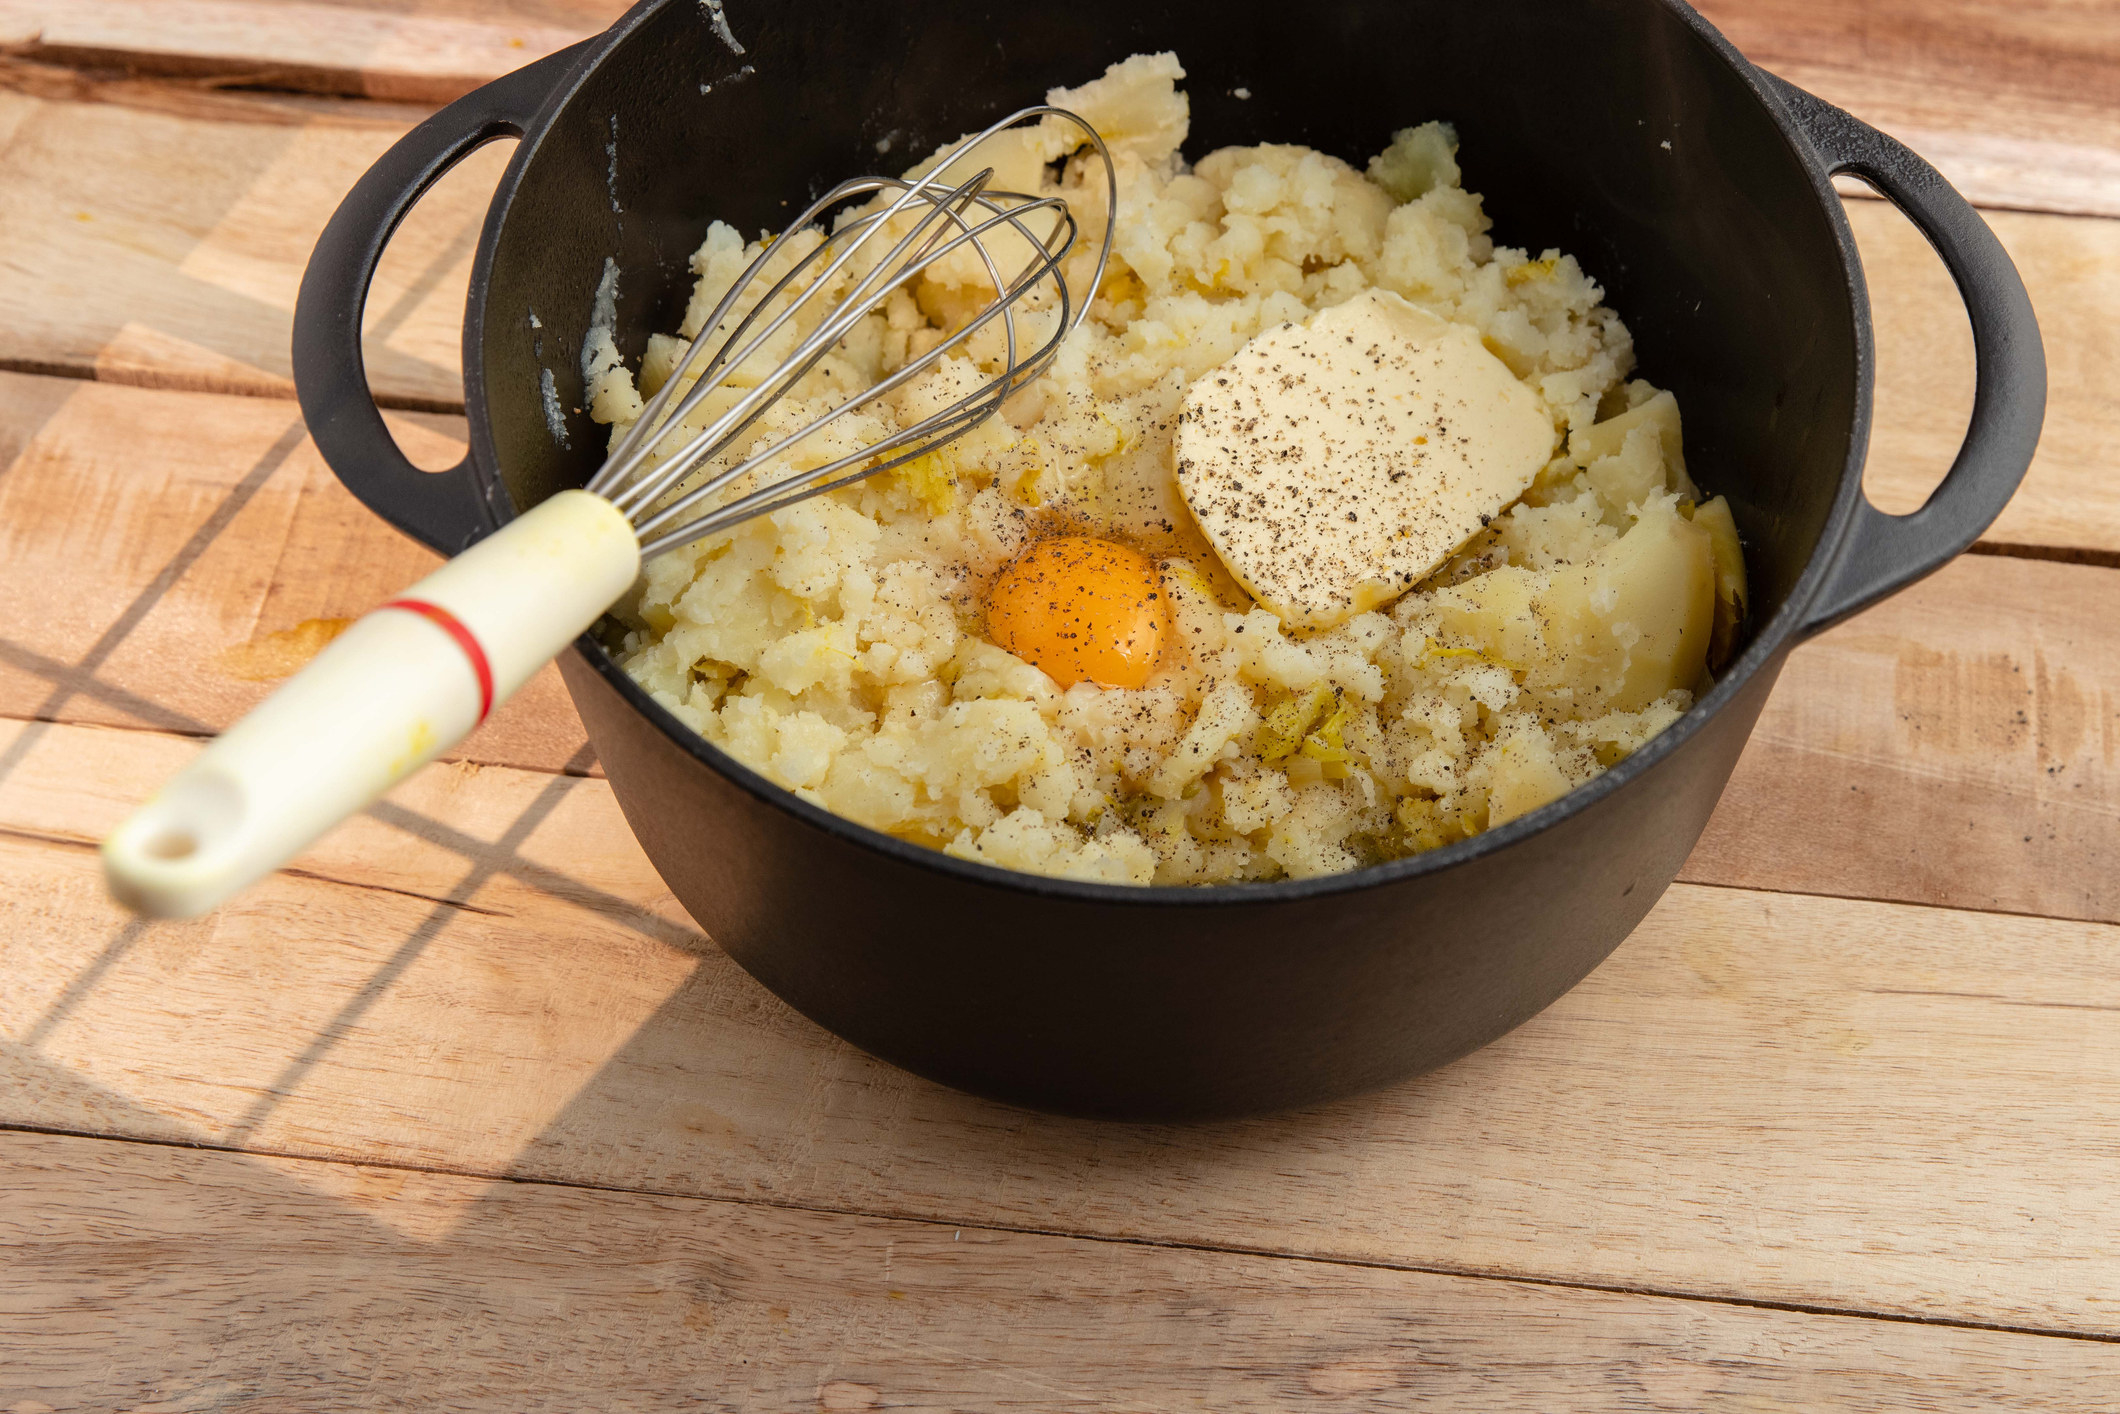 Mashed potatoes with butter and an egg yolk.